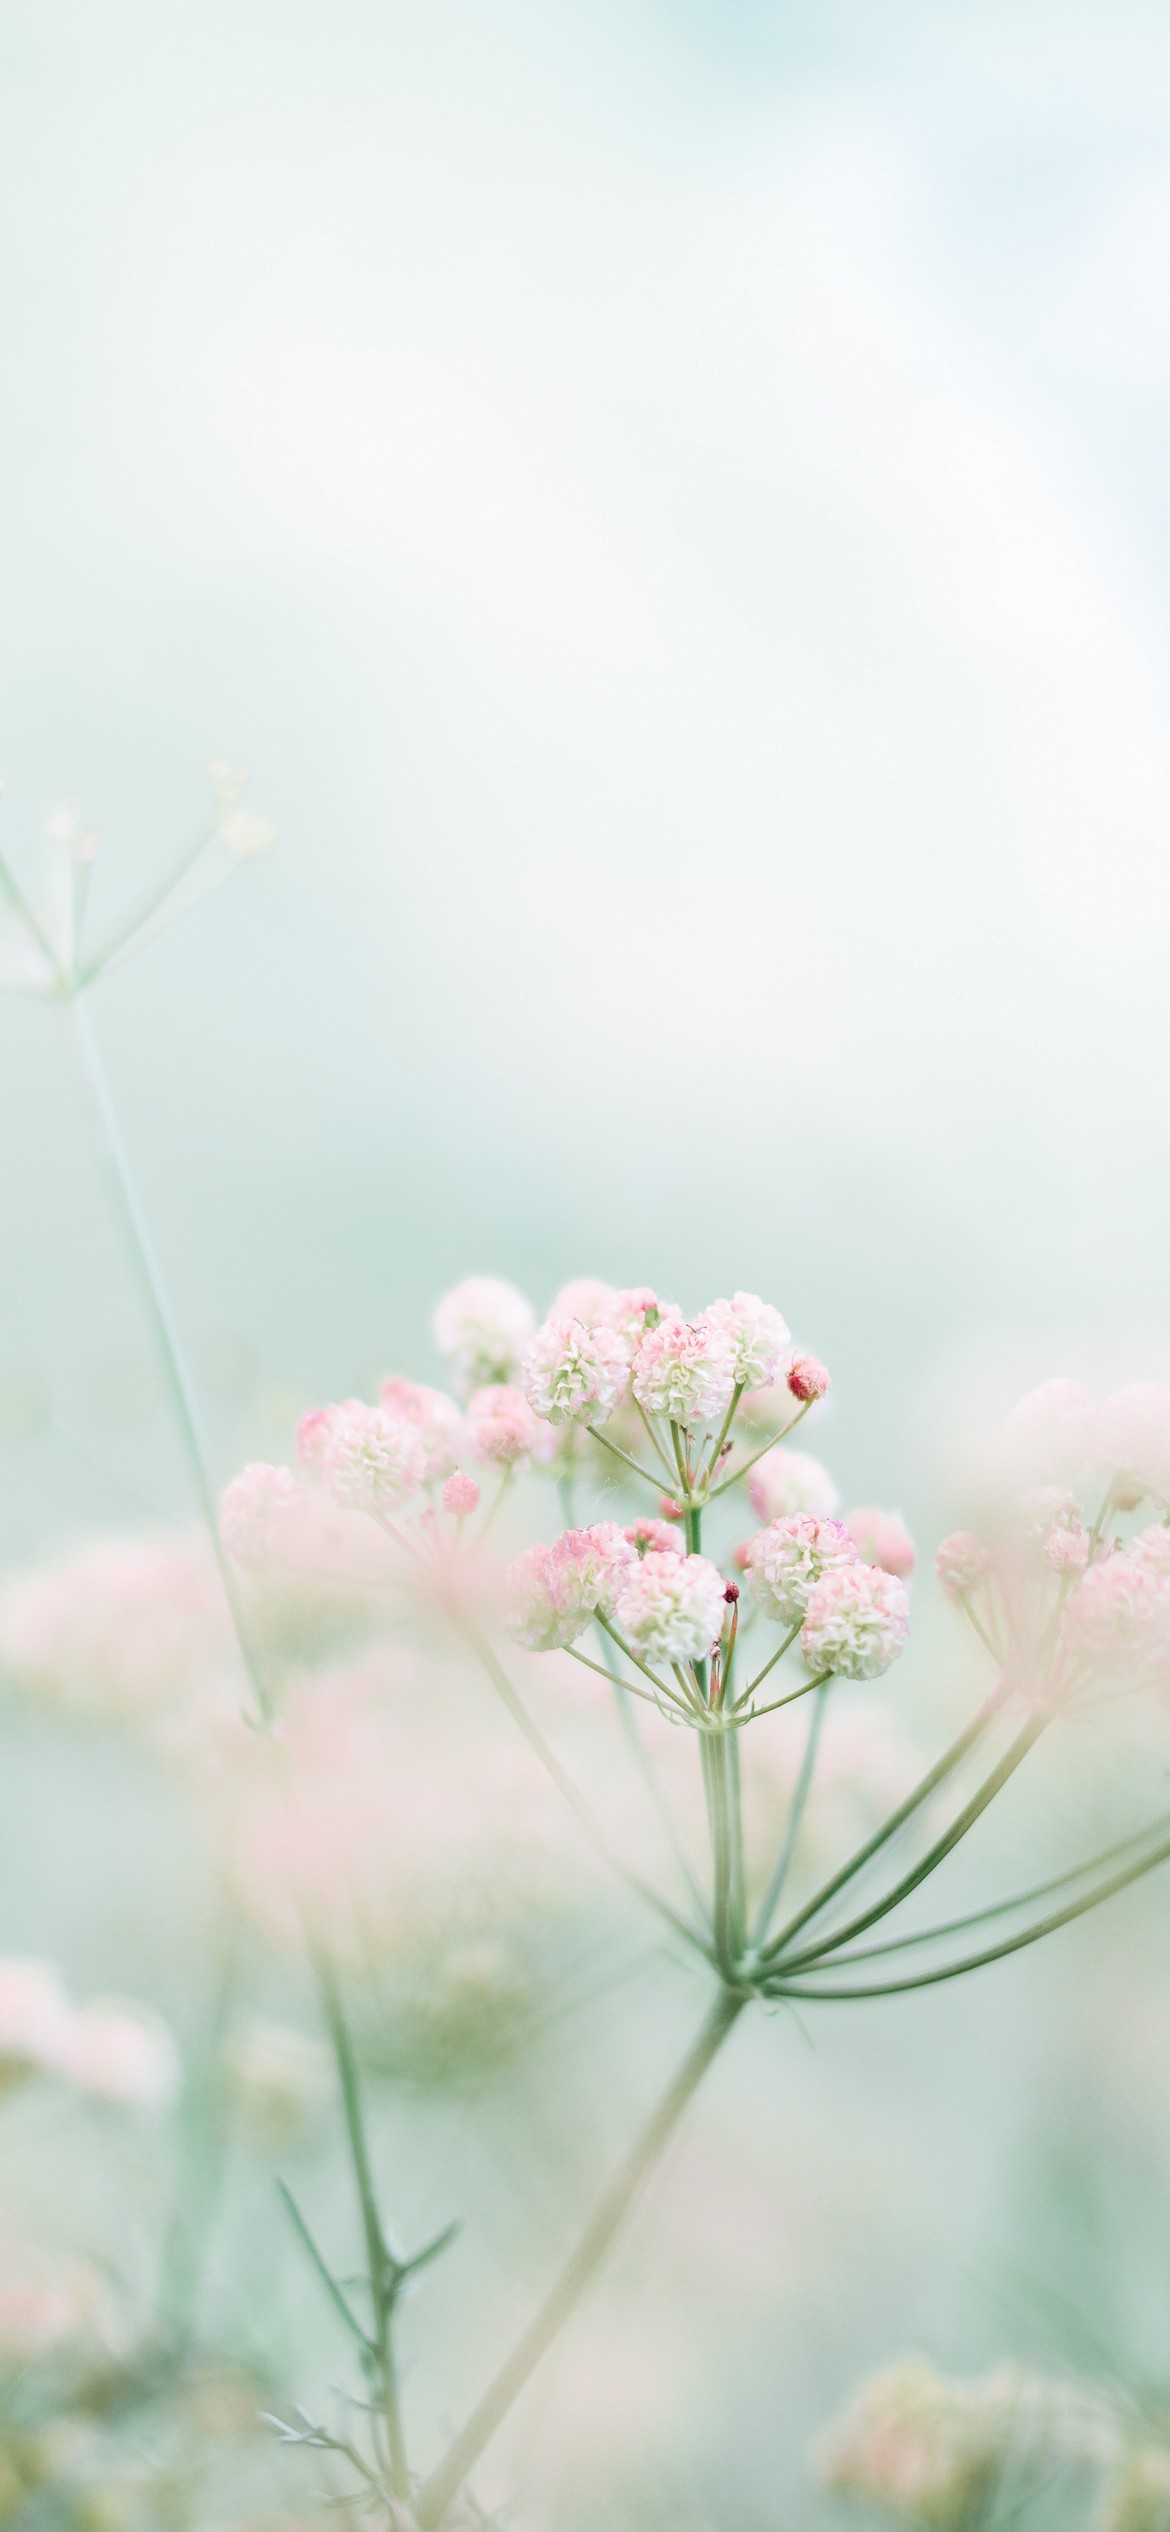 Beautiful Flowers On A Pastel Blue Background Romantic Aesthetic Natural  Concept Flower Pastel Plant Background Image And Wallpaper for Free  Download